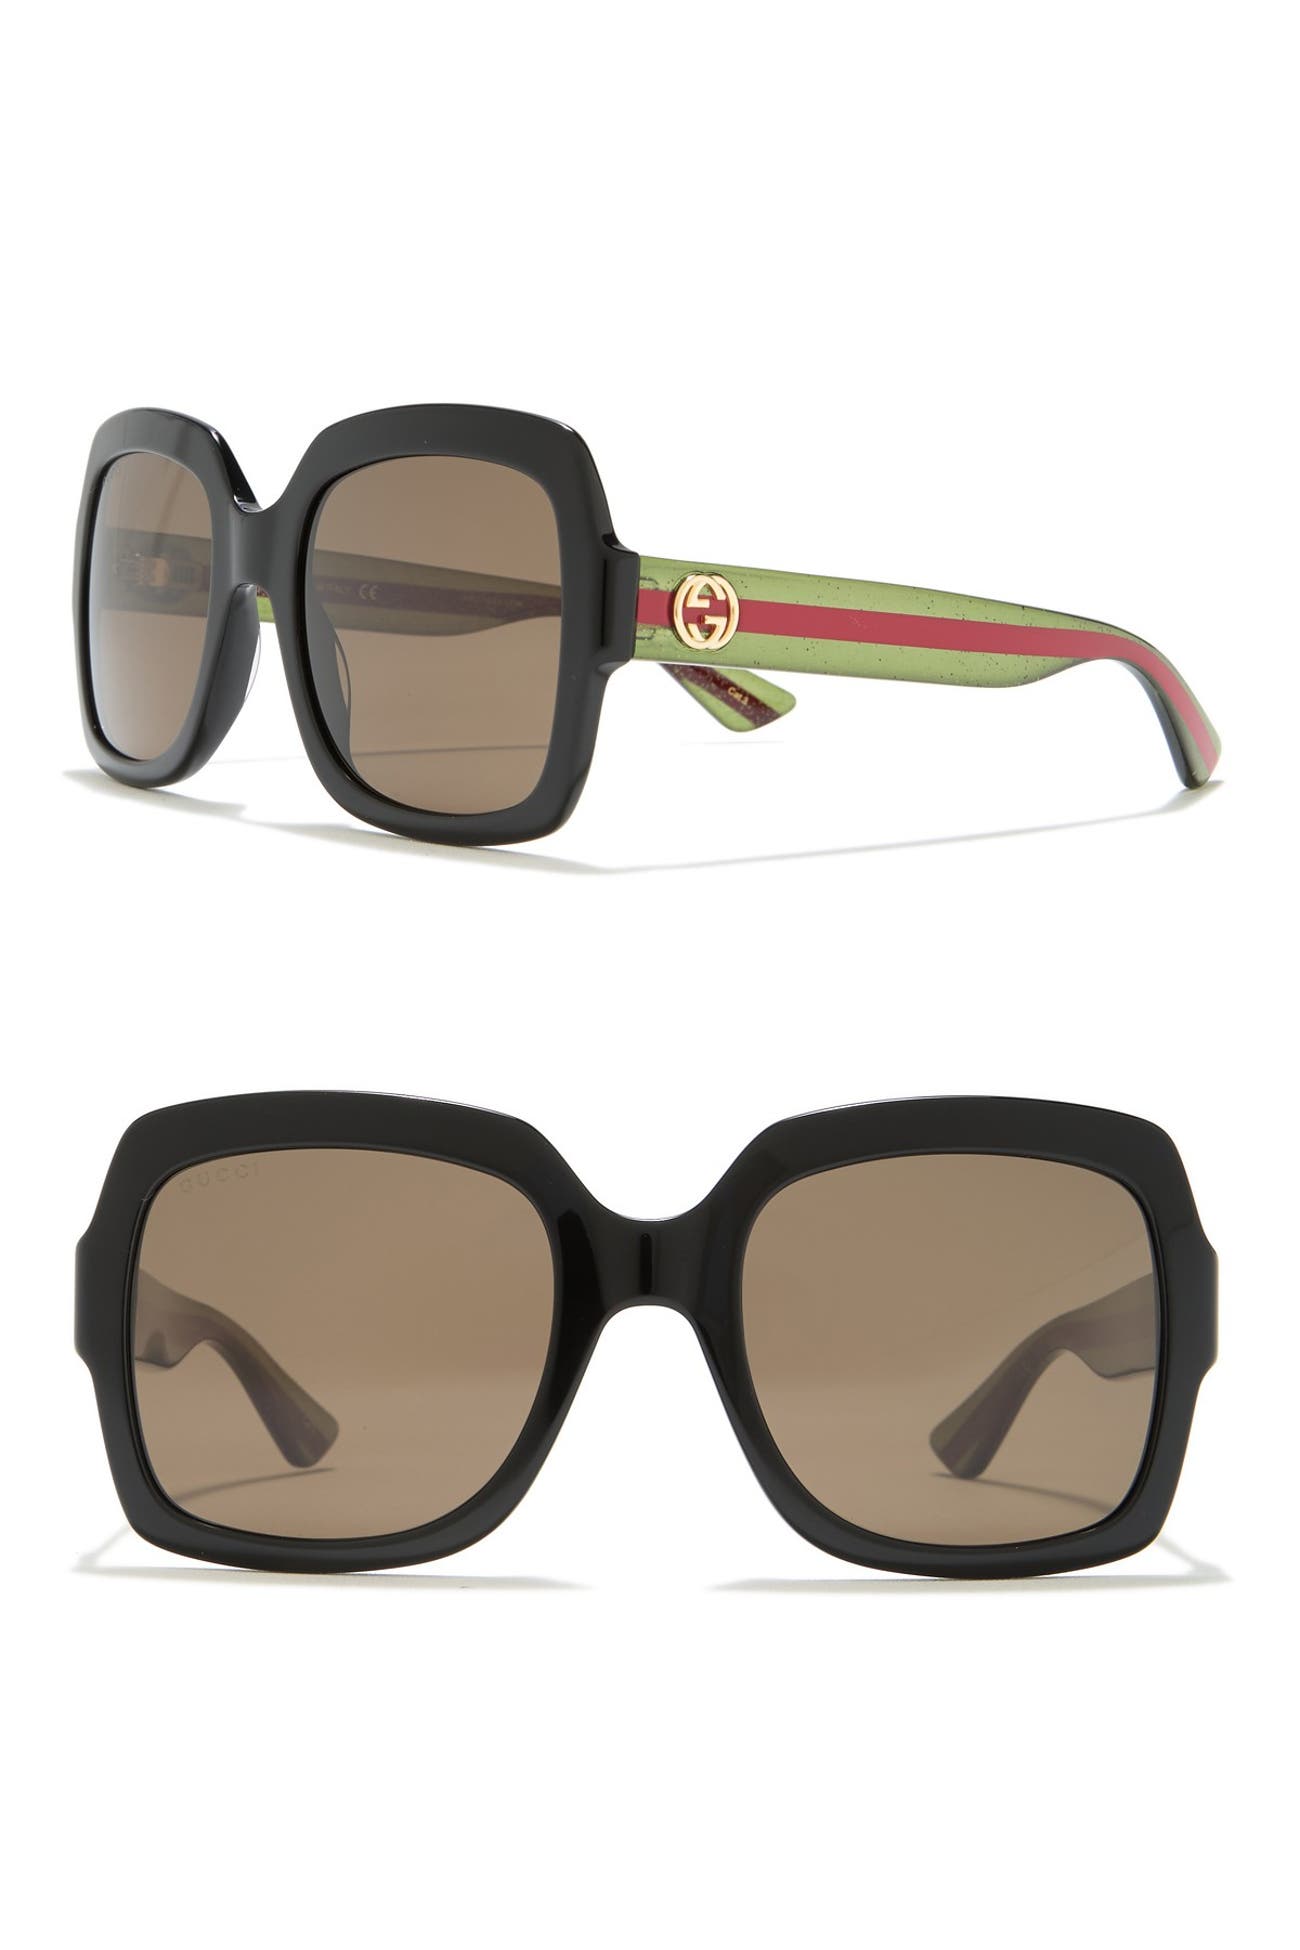 Gucci 54mm Square Oversized Sunglasses Nordstrom Rack